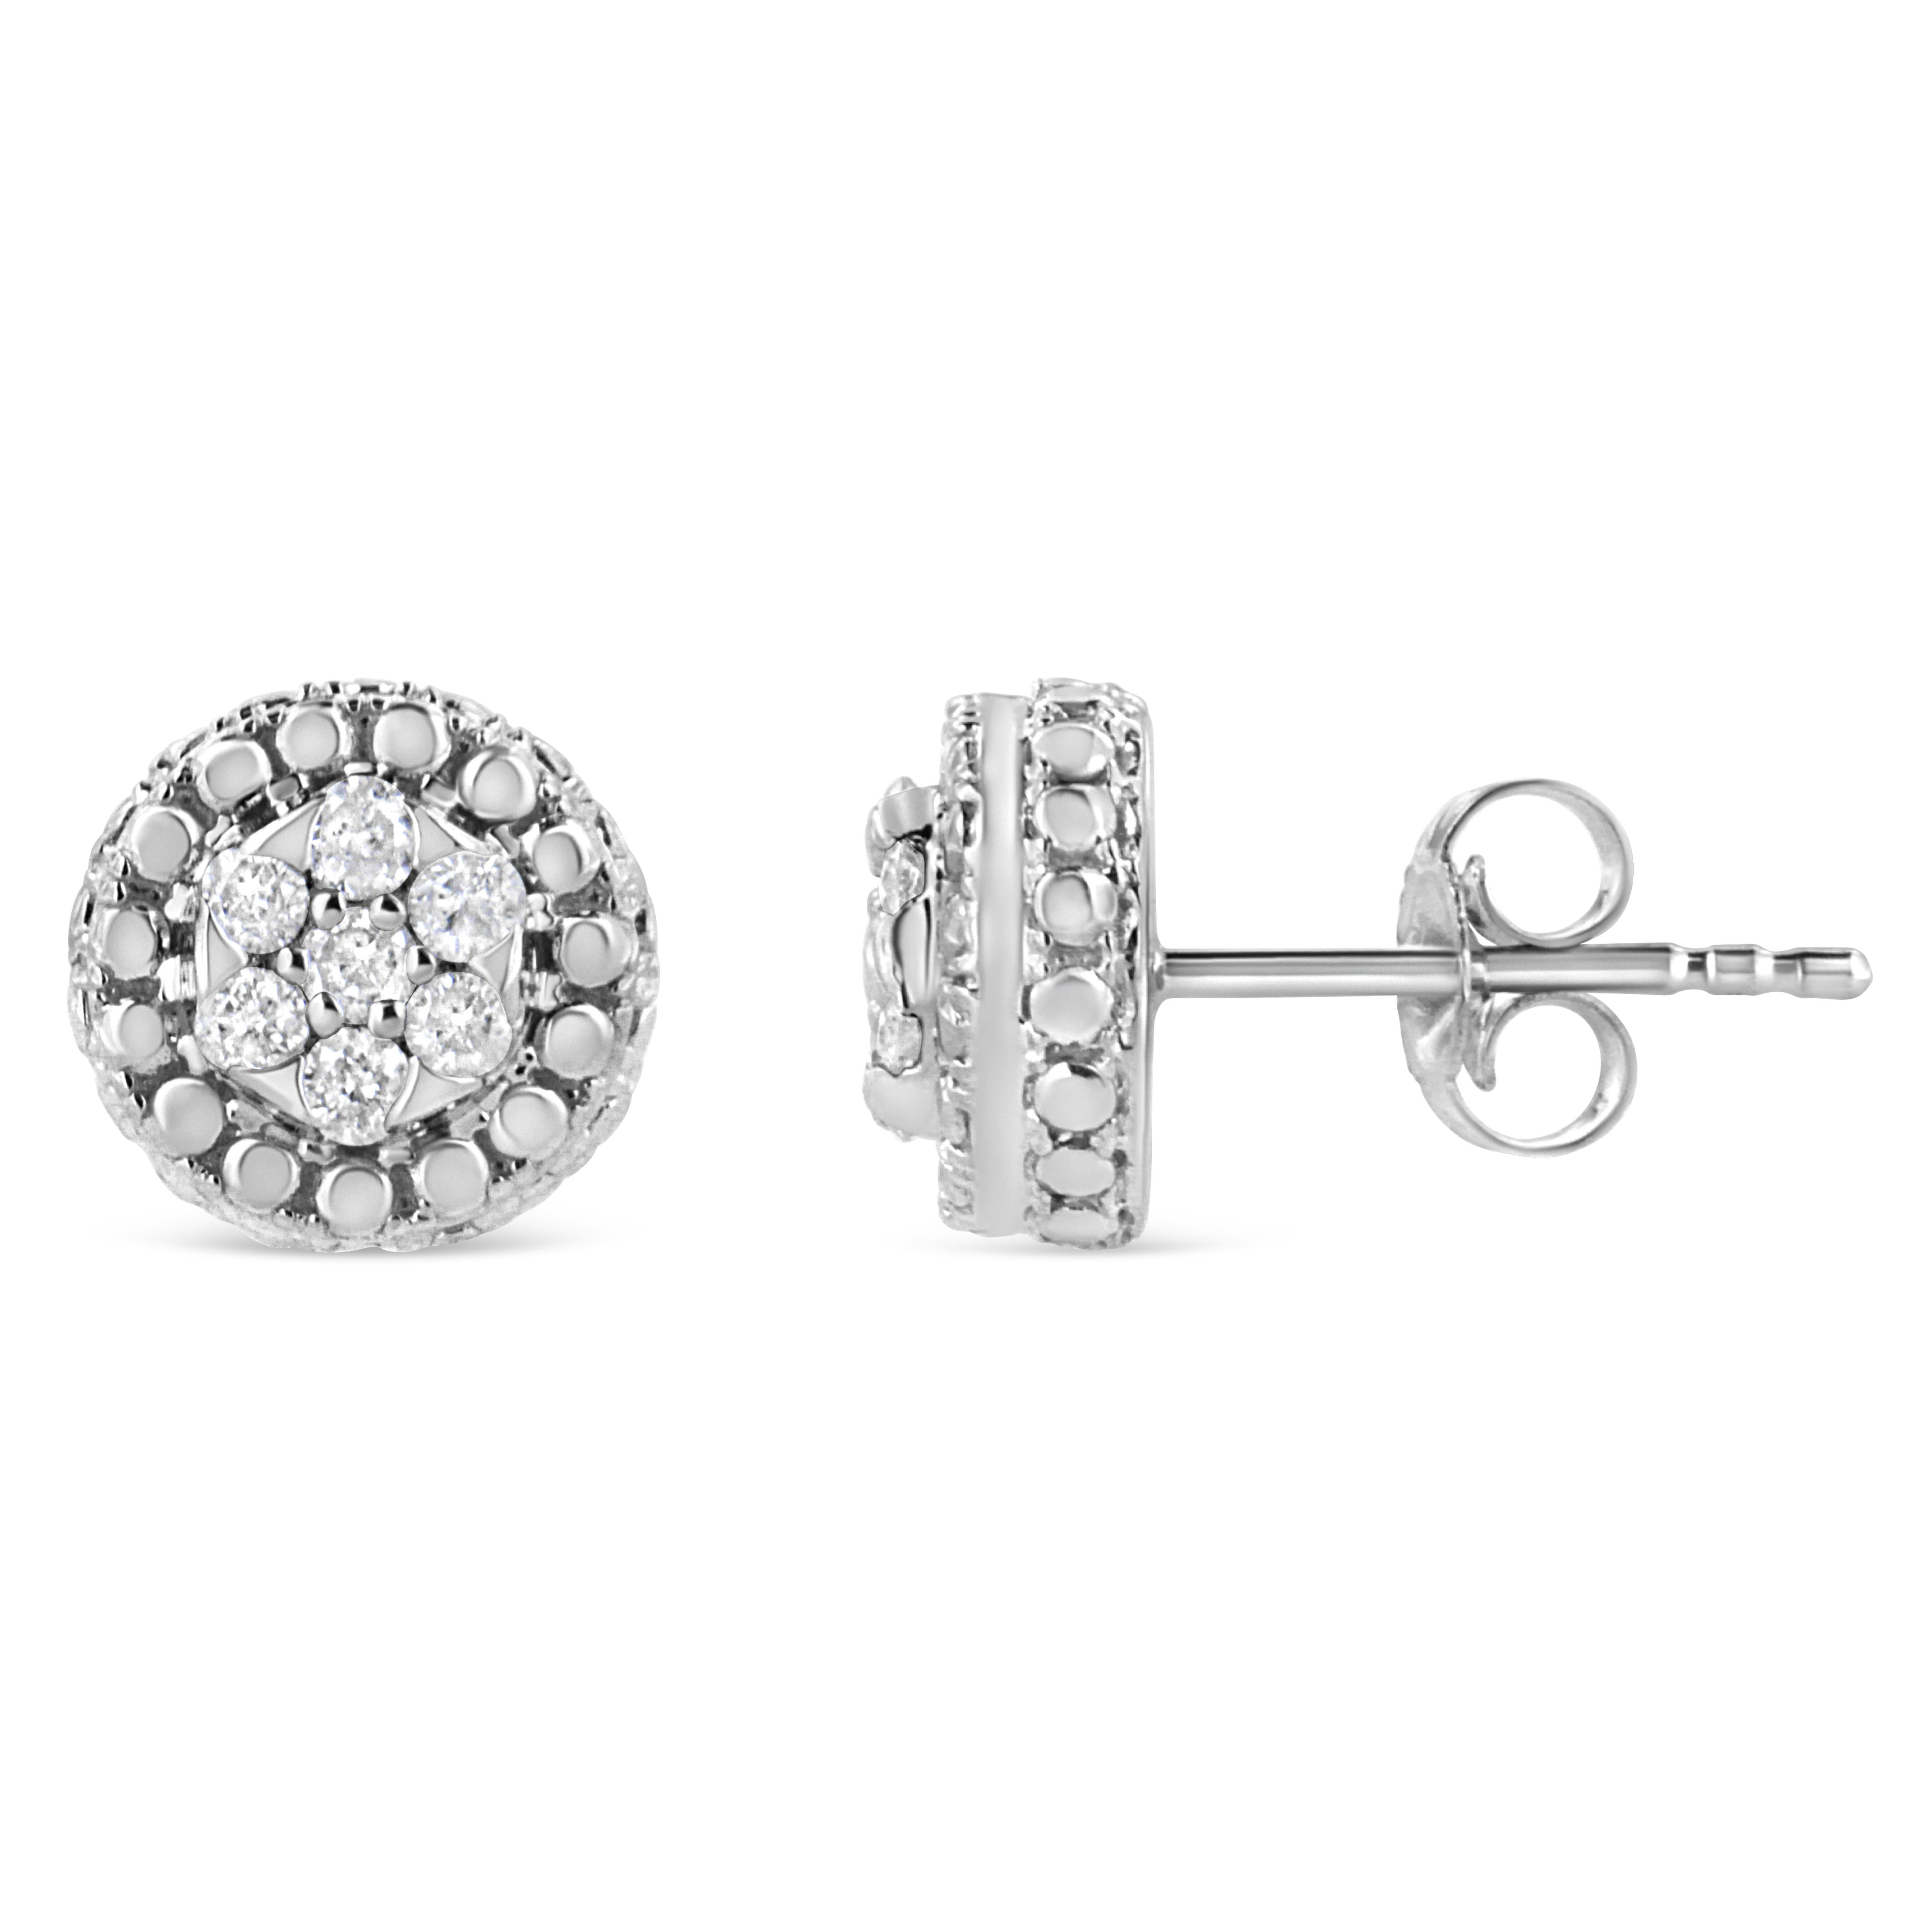 You will love these elaborately designed silver stud earrings. This authentic design is crafted of real 92.5% sterling silver that has been electro-coated with genuine rhodium (a platinum-family metal), a precious metal that will keep a tarnish-free